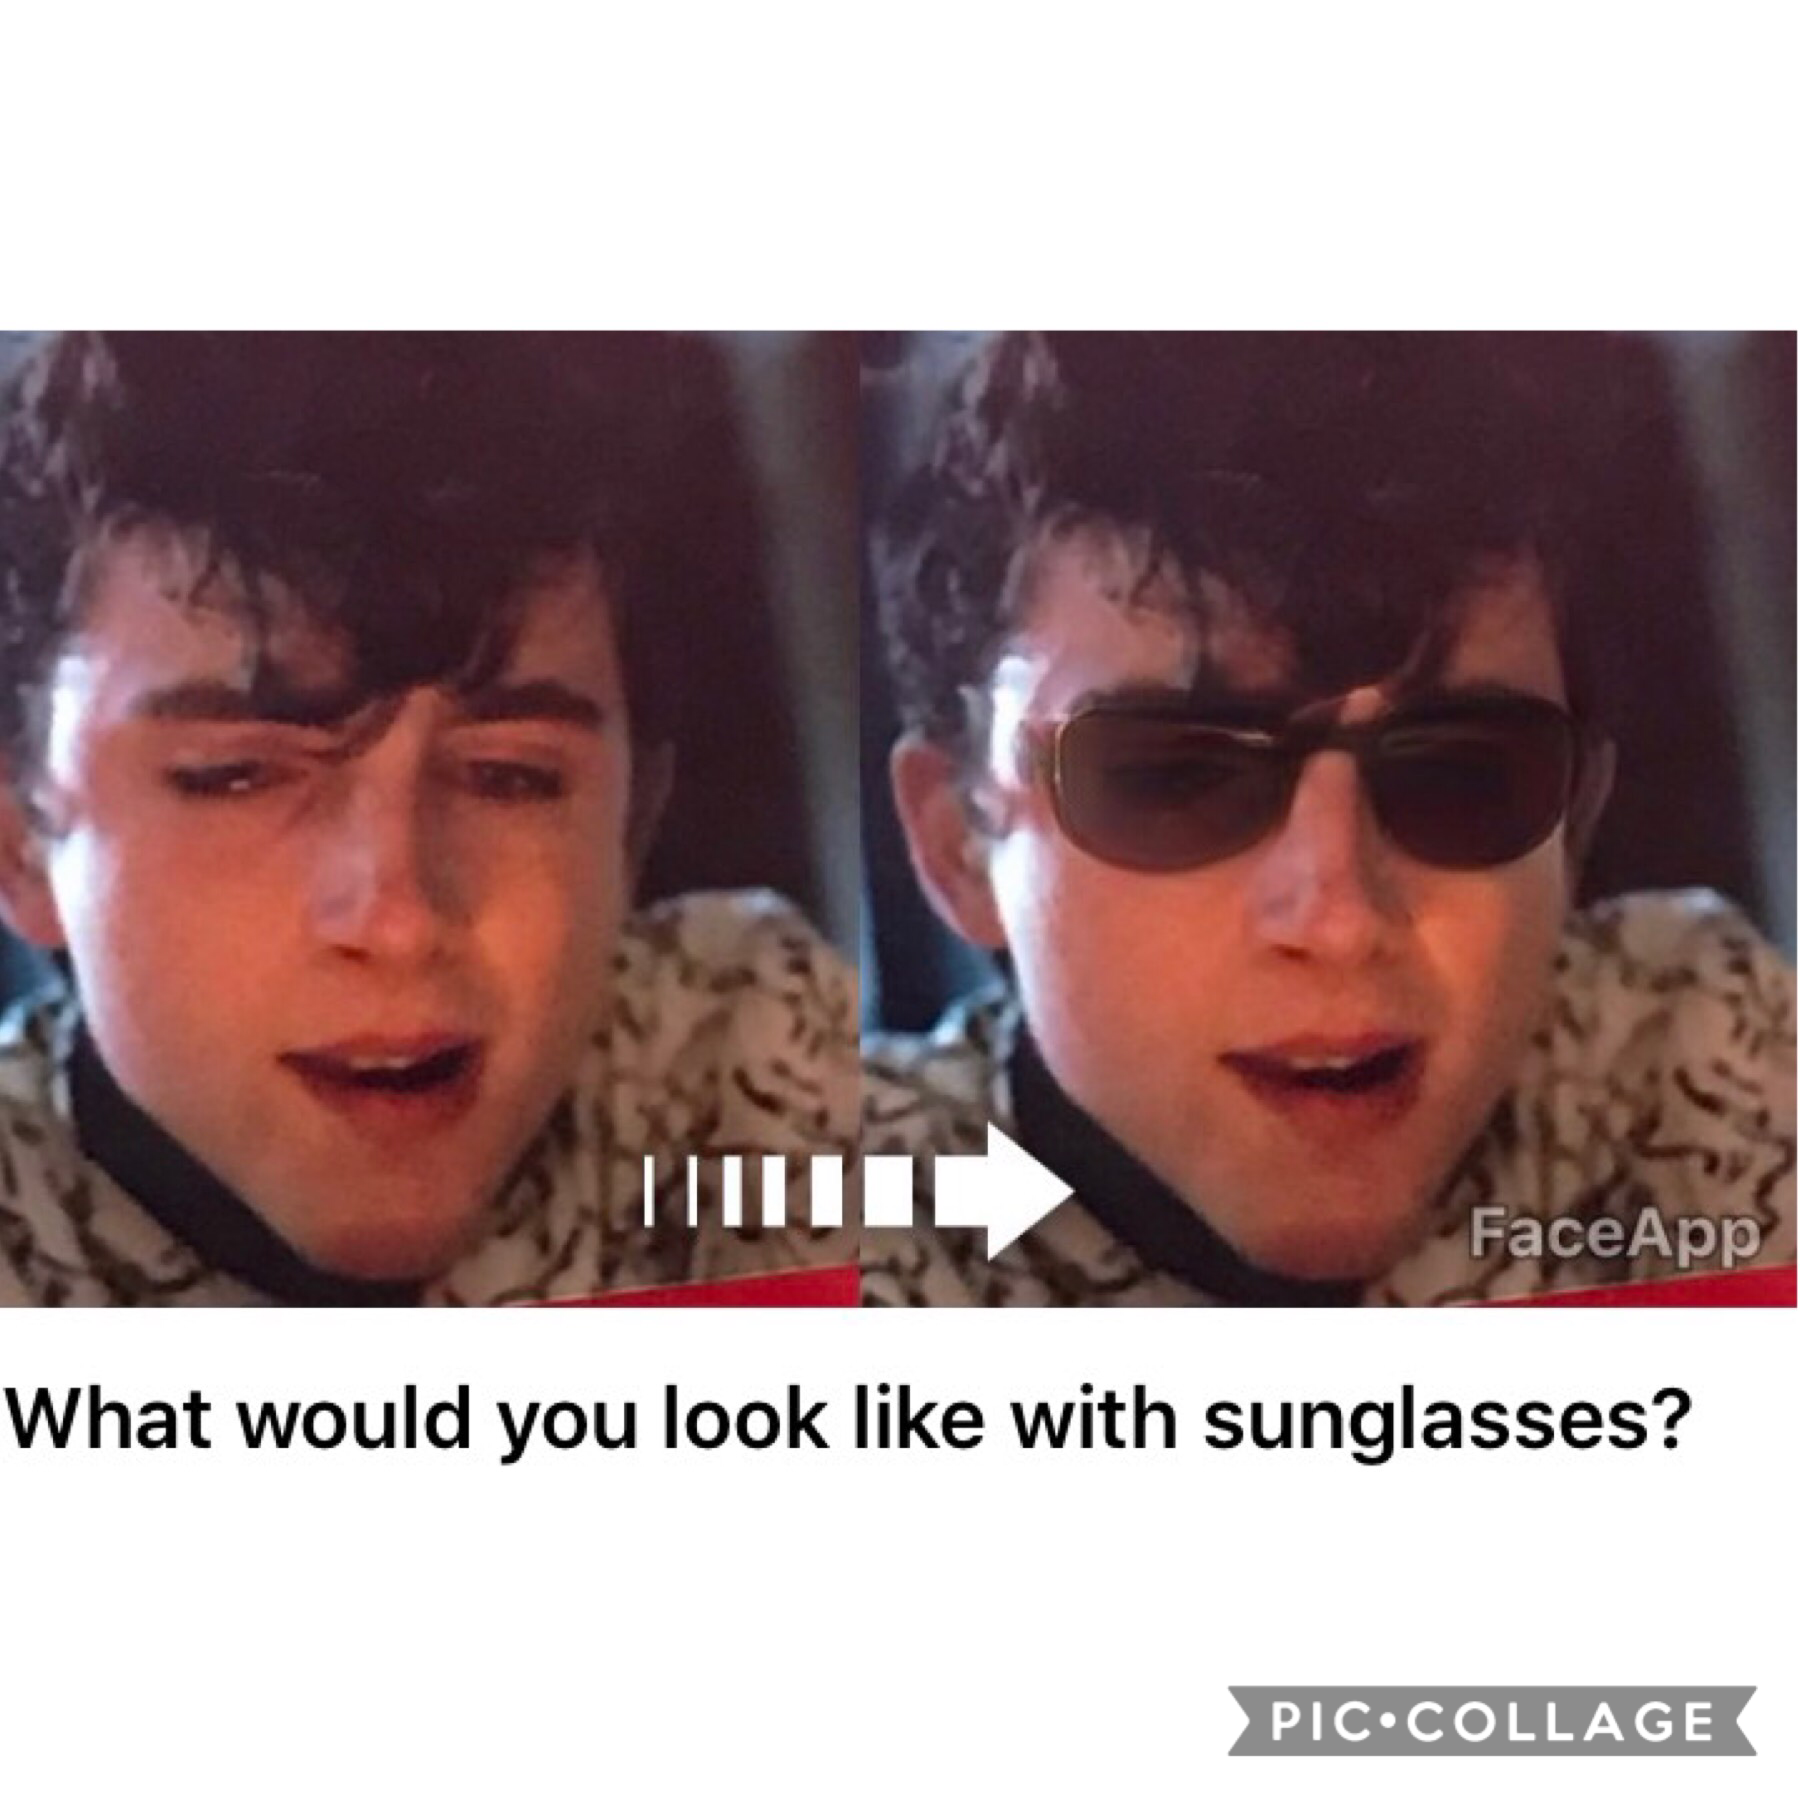 Timothee chalamet in the saddest scene ever wearin sunglasses
Also why have a video feature on pc if its gonna be shared as a still image????????????